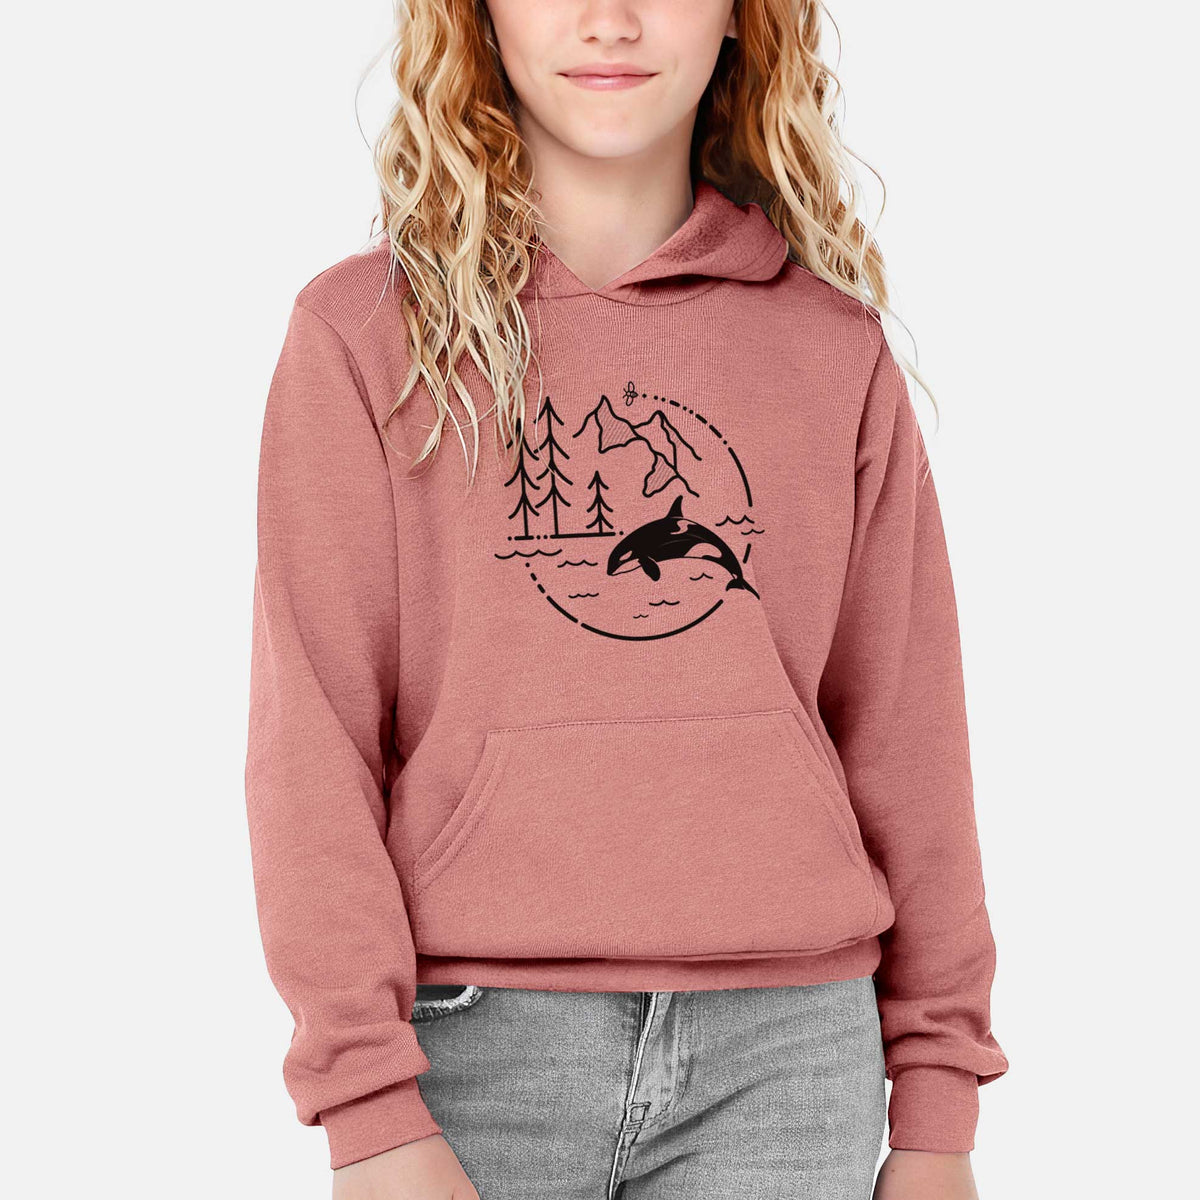 It&#39;s All Connected - Orca - Youth Hoodie Sweatshirt